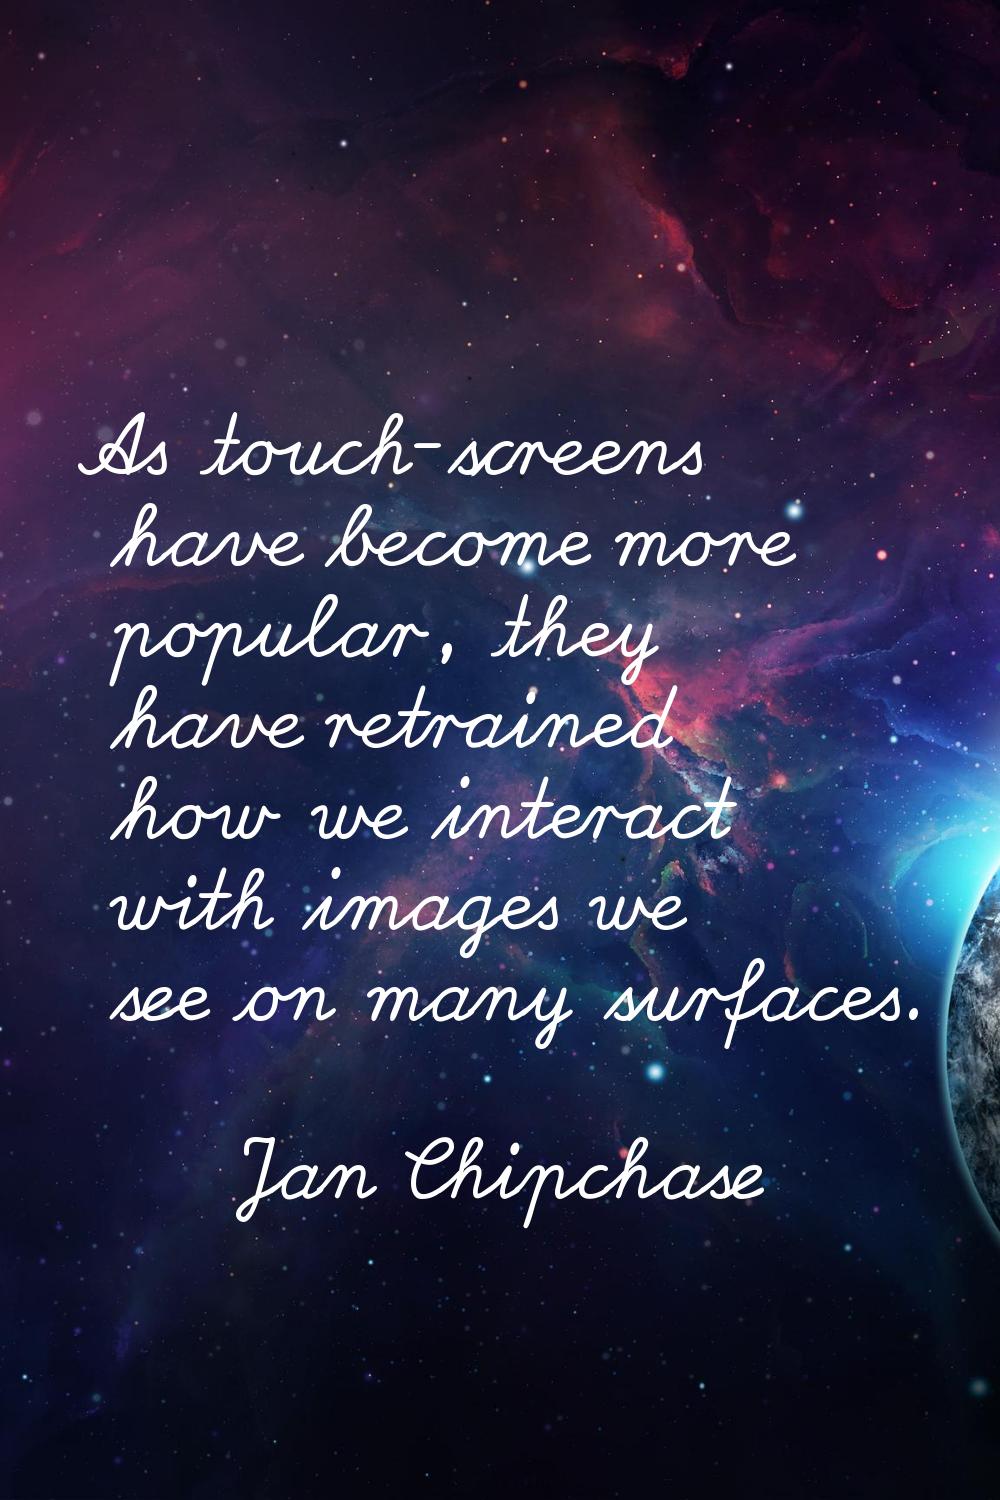 As touch-screens have become more popular, they have retrained how we interact with images we see o